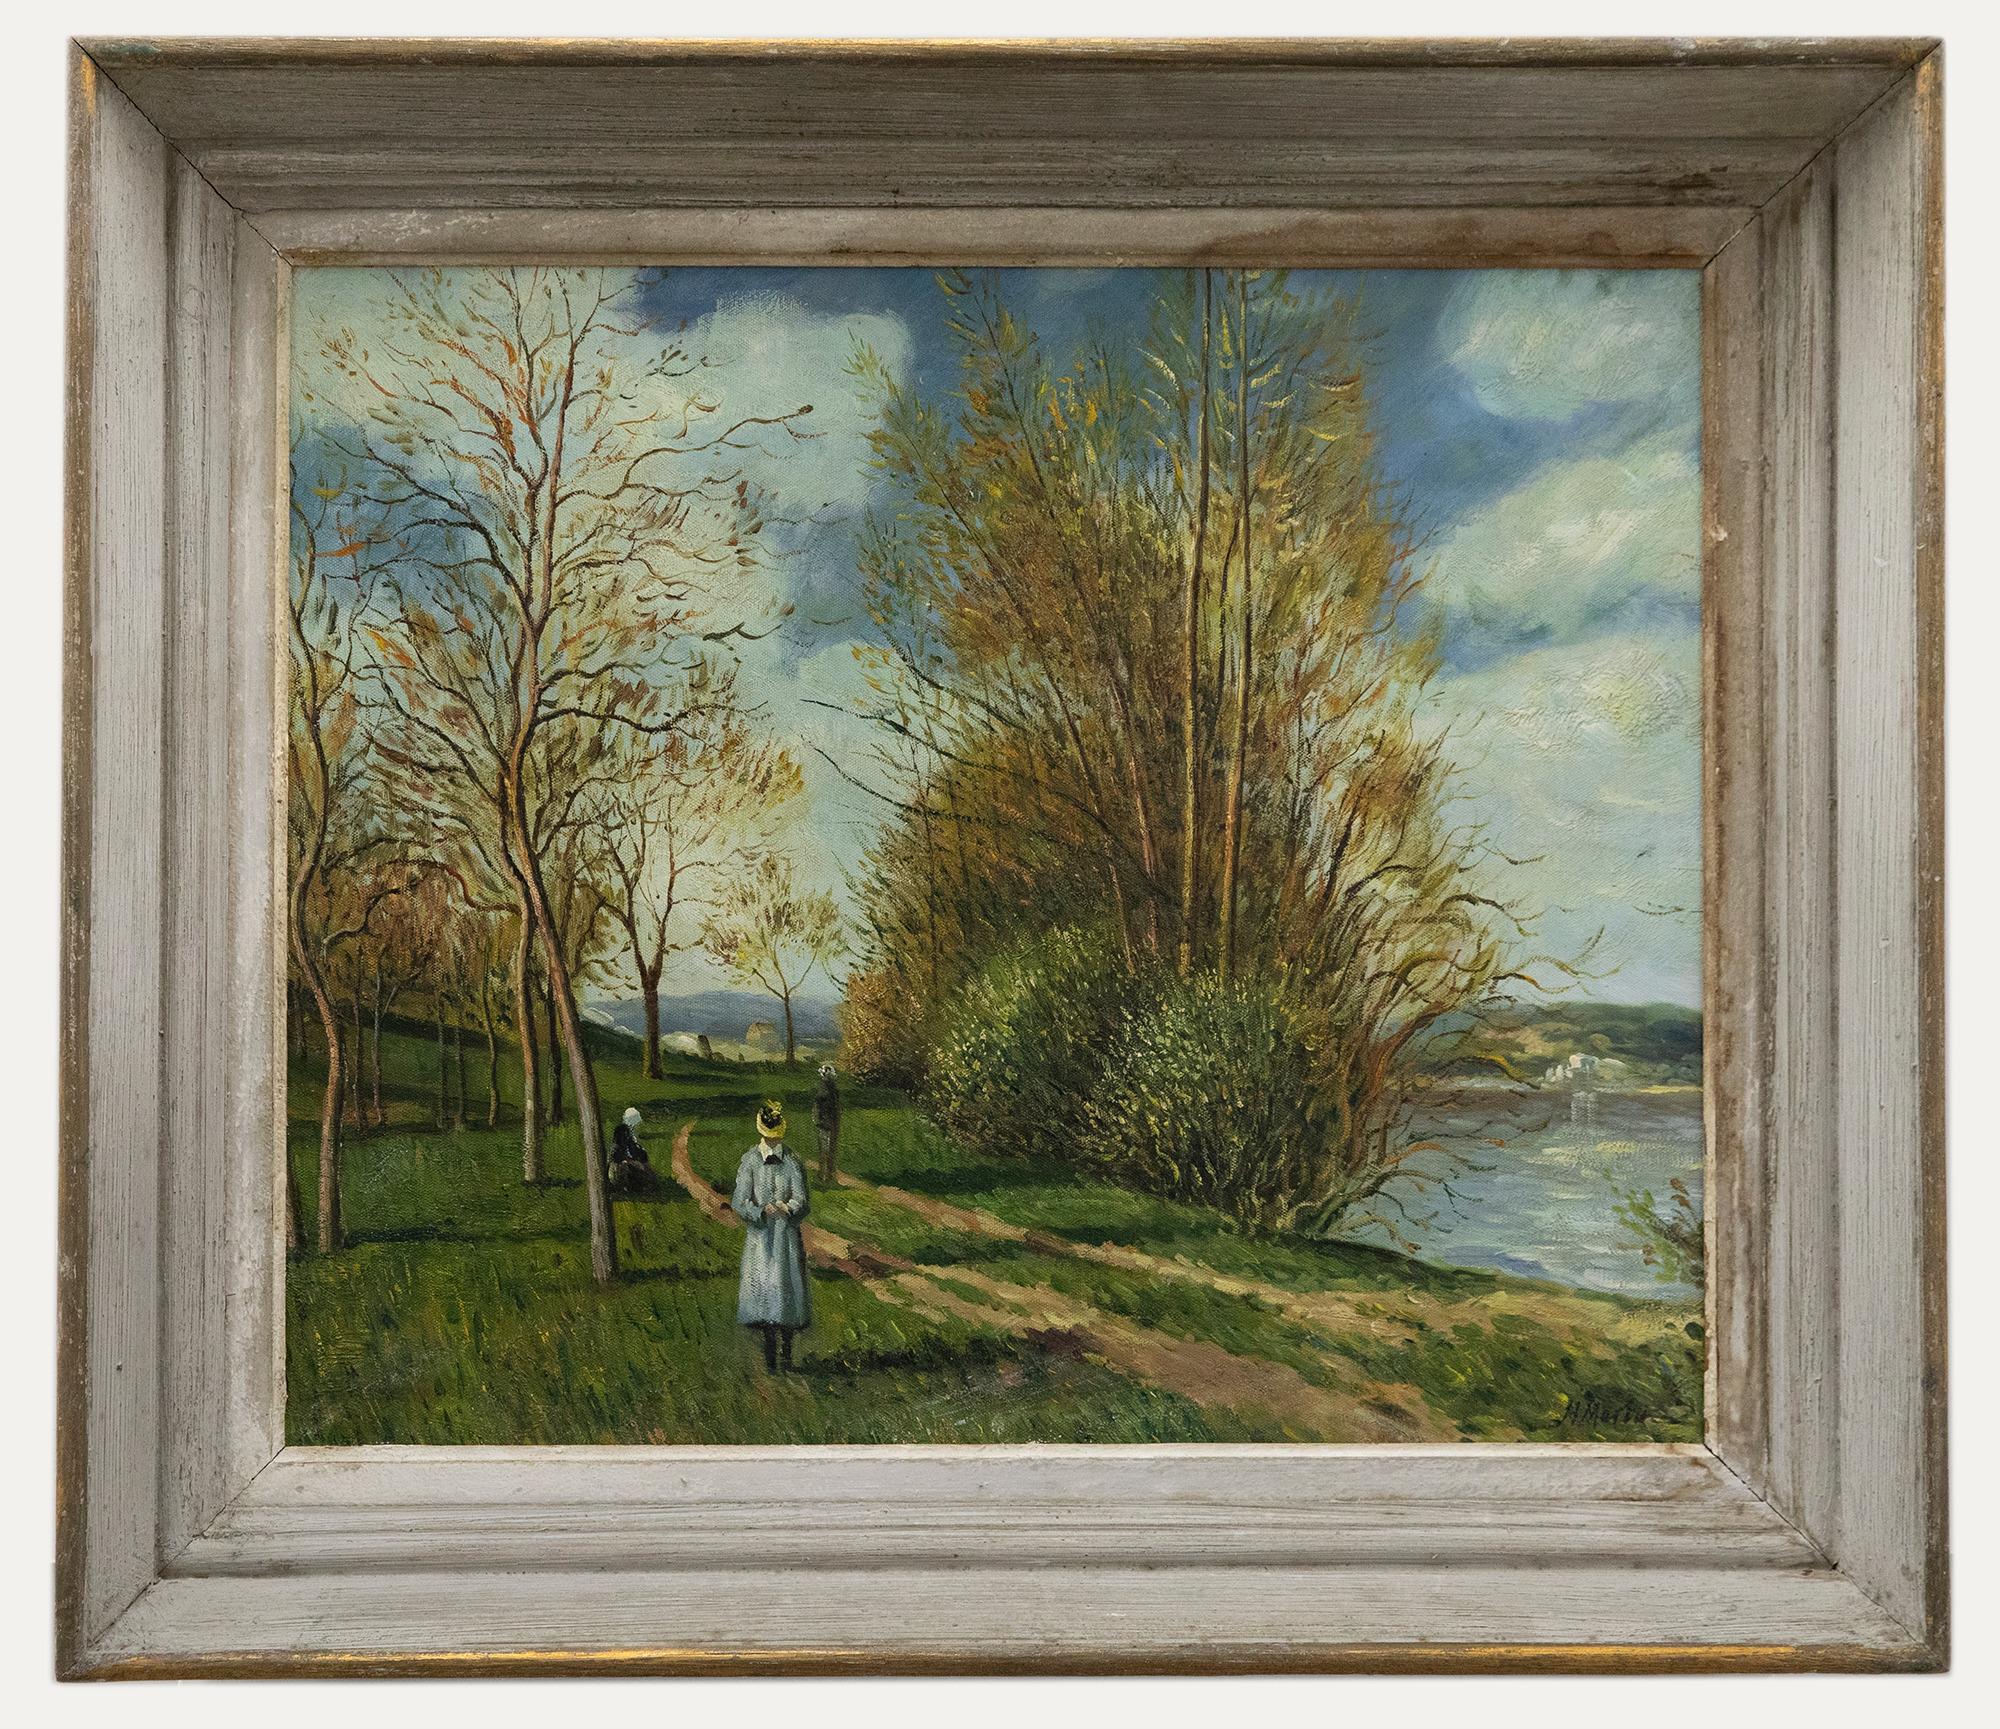 Unknown Landscape Painting - After Alfred Sisley (1839-1899) - 20th Century Oil, The Small Meadows in Spring